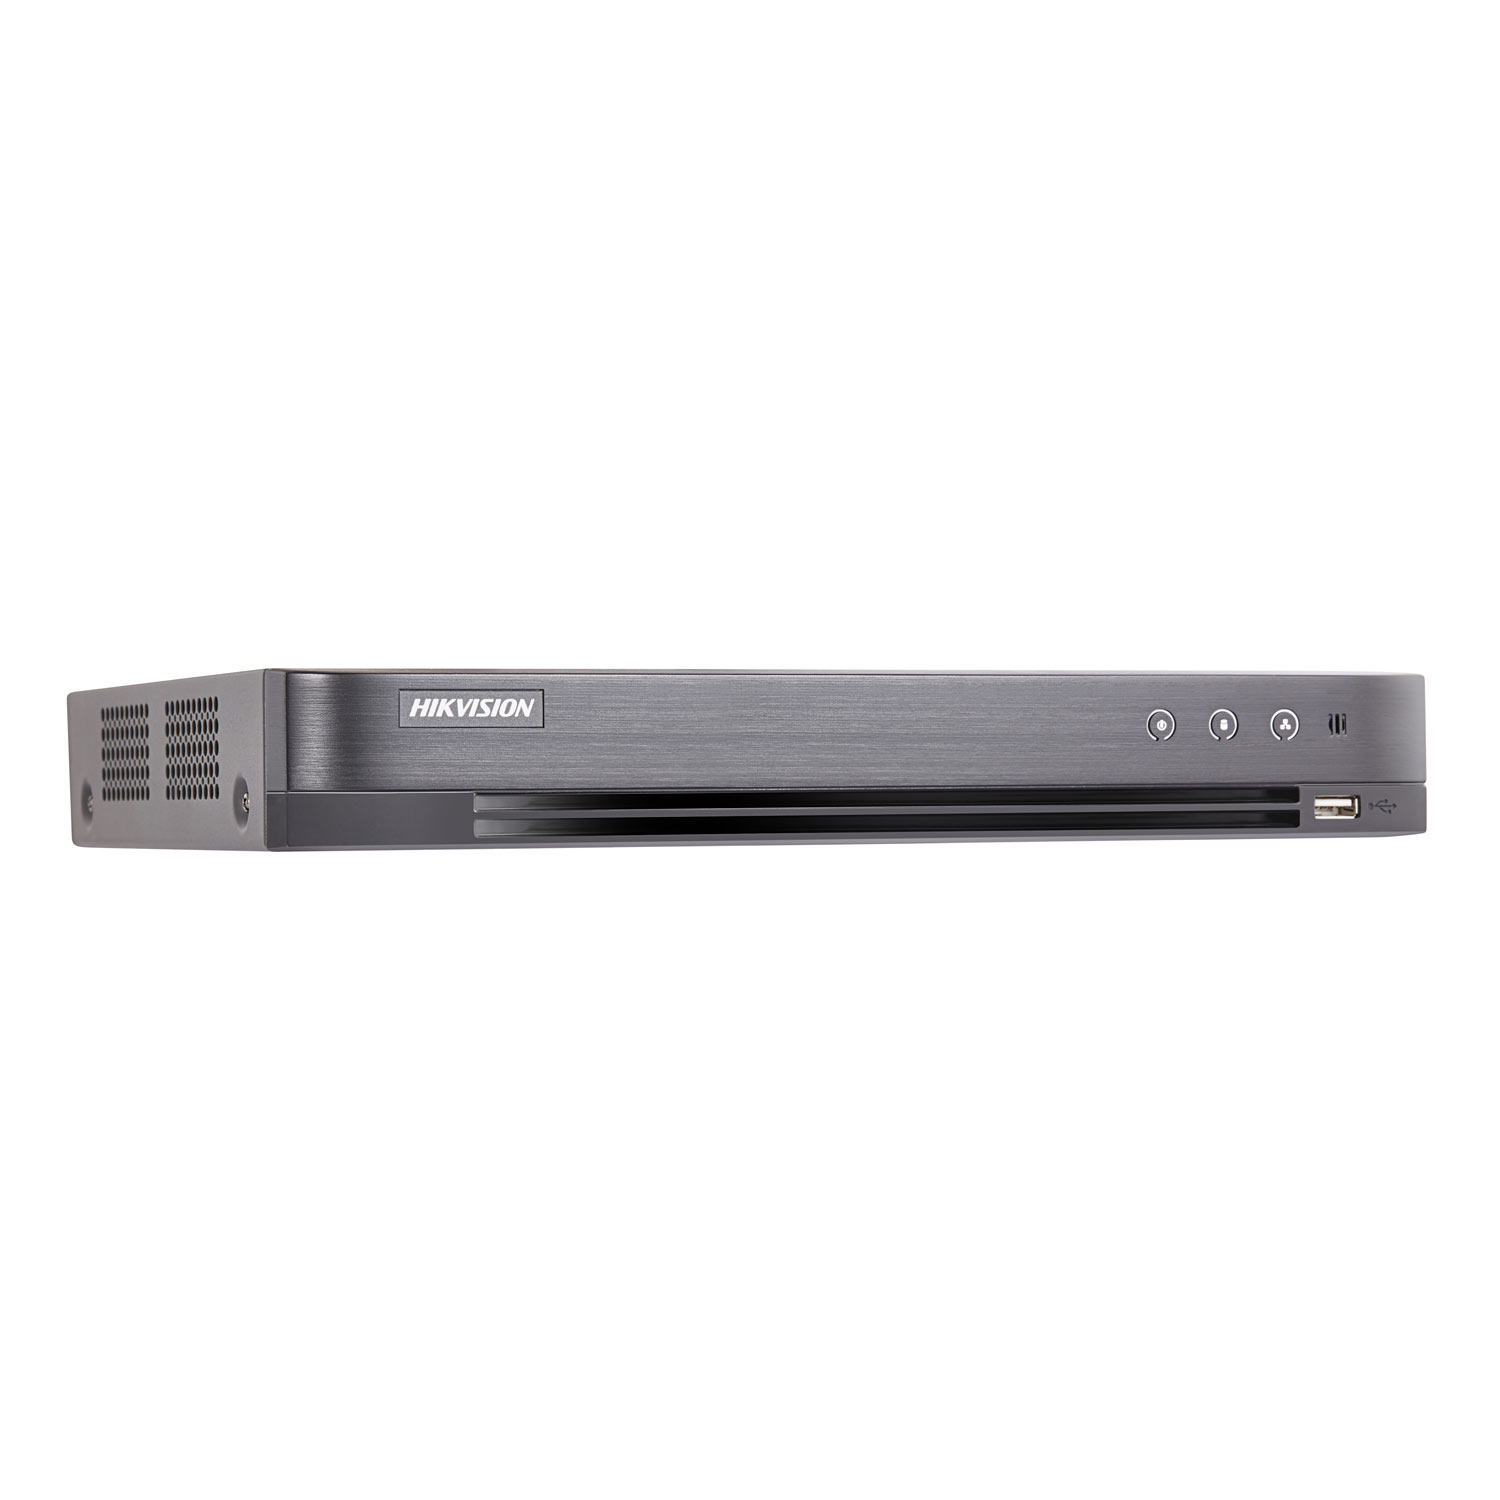 DVR HikVision Turbo HD DS-7204HTHI-K1, 4 canale, 8 MP, audio prin coaxial Hikvision imagine noua idaho.ro